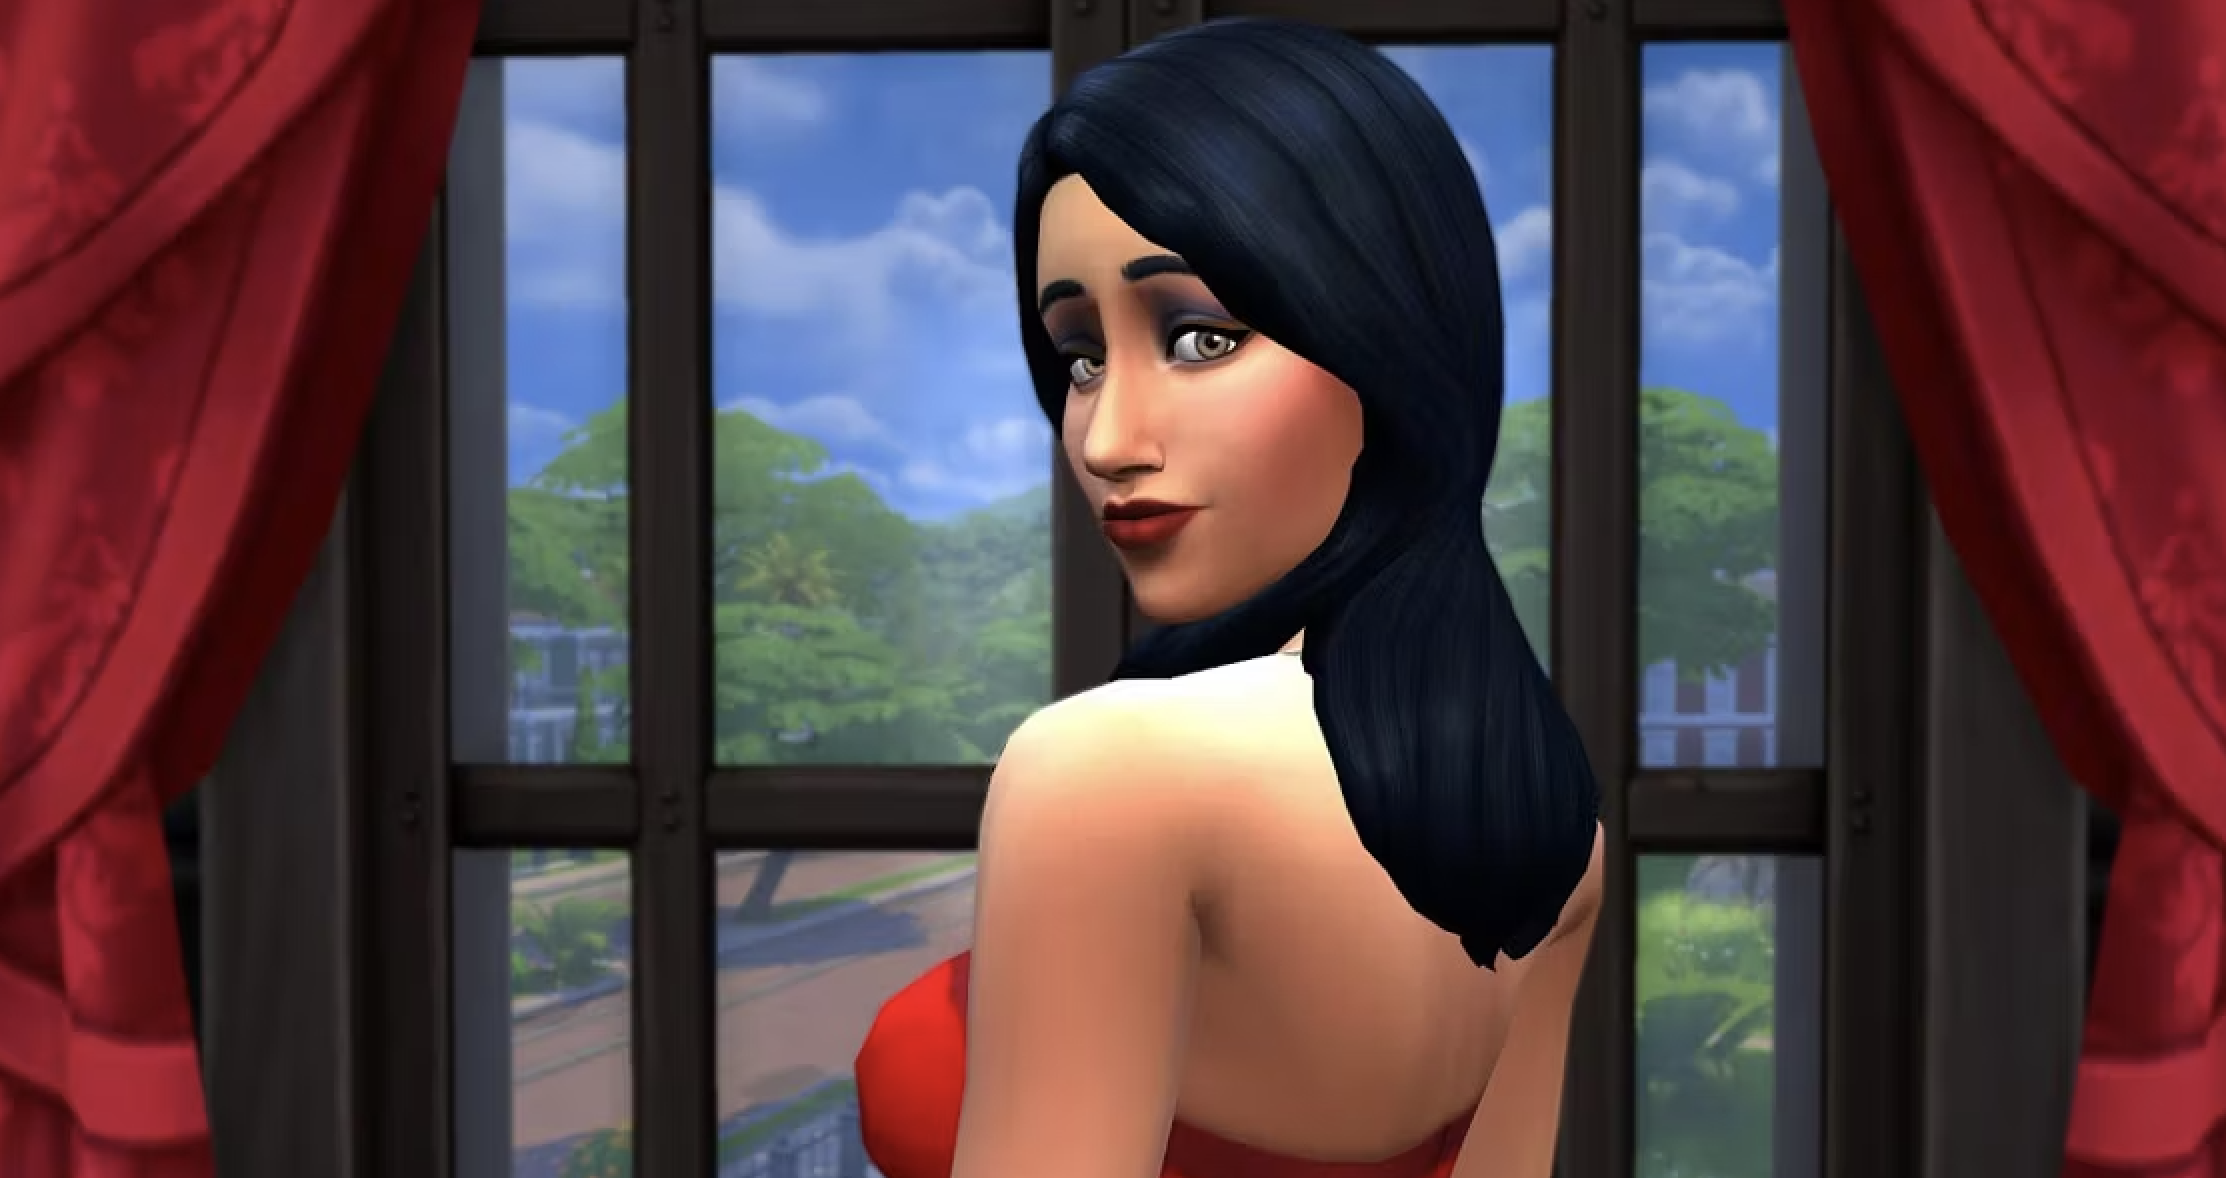 Bella Goth looking over her shoulder by a window with curtains